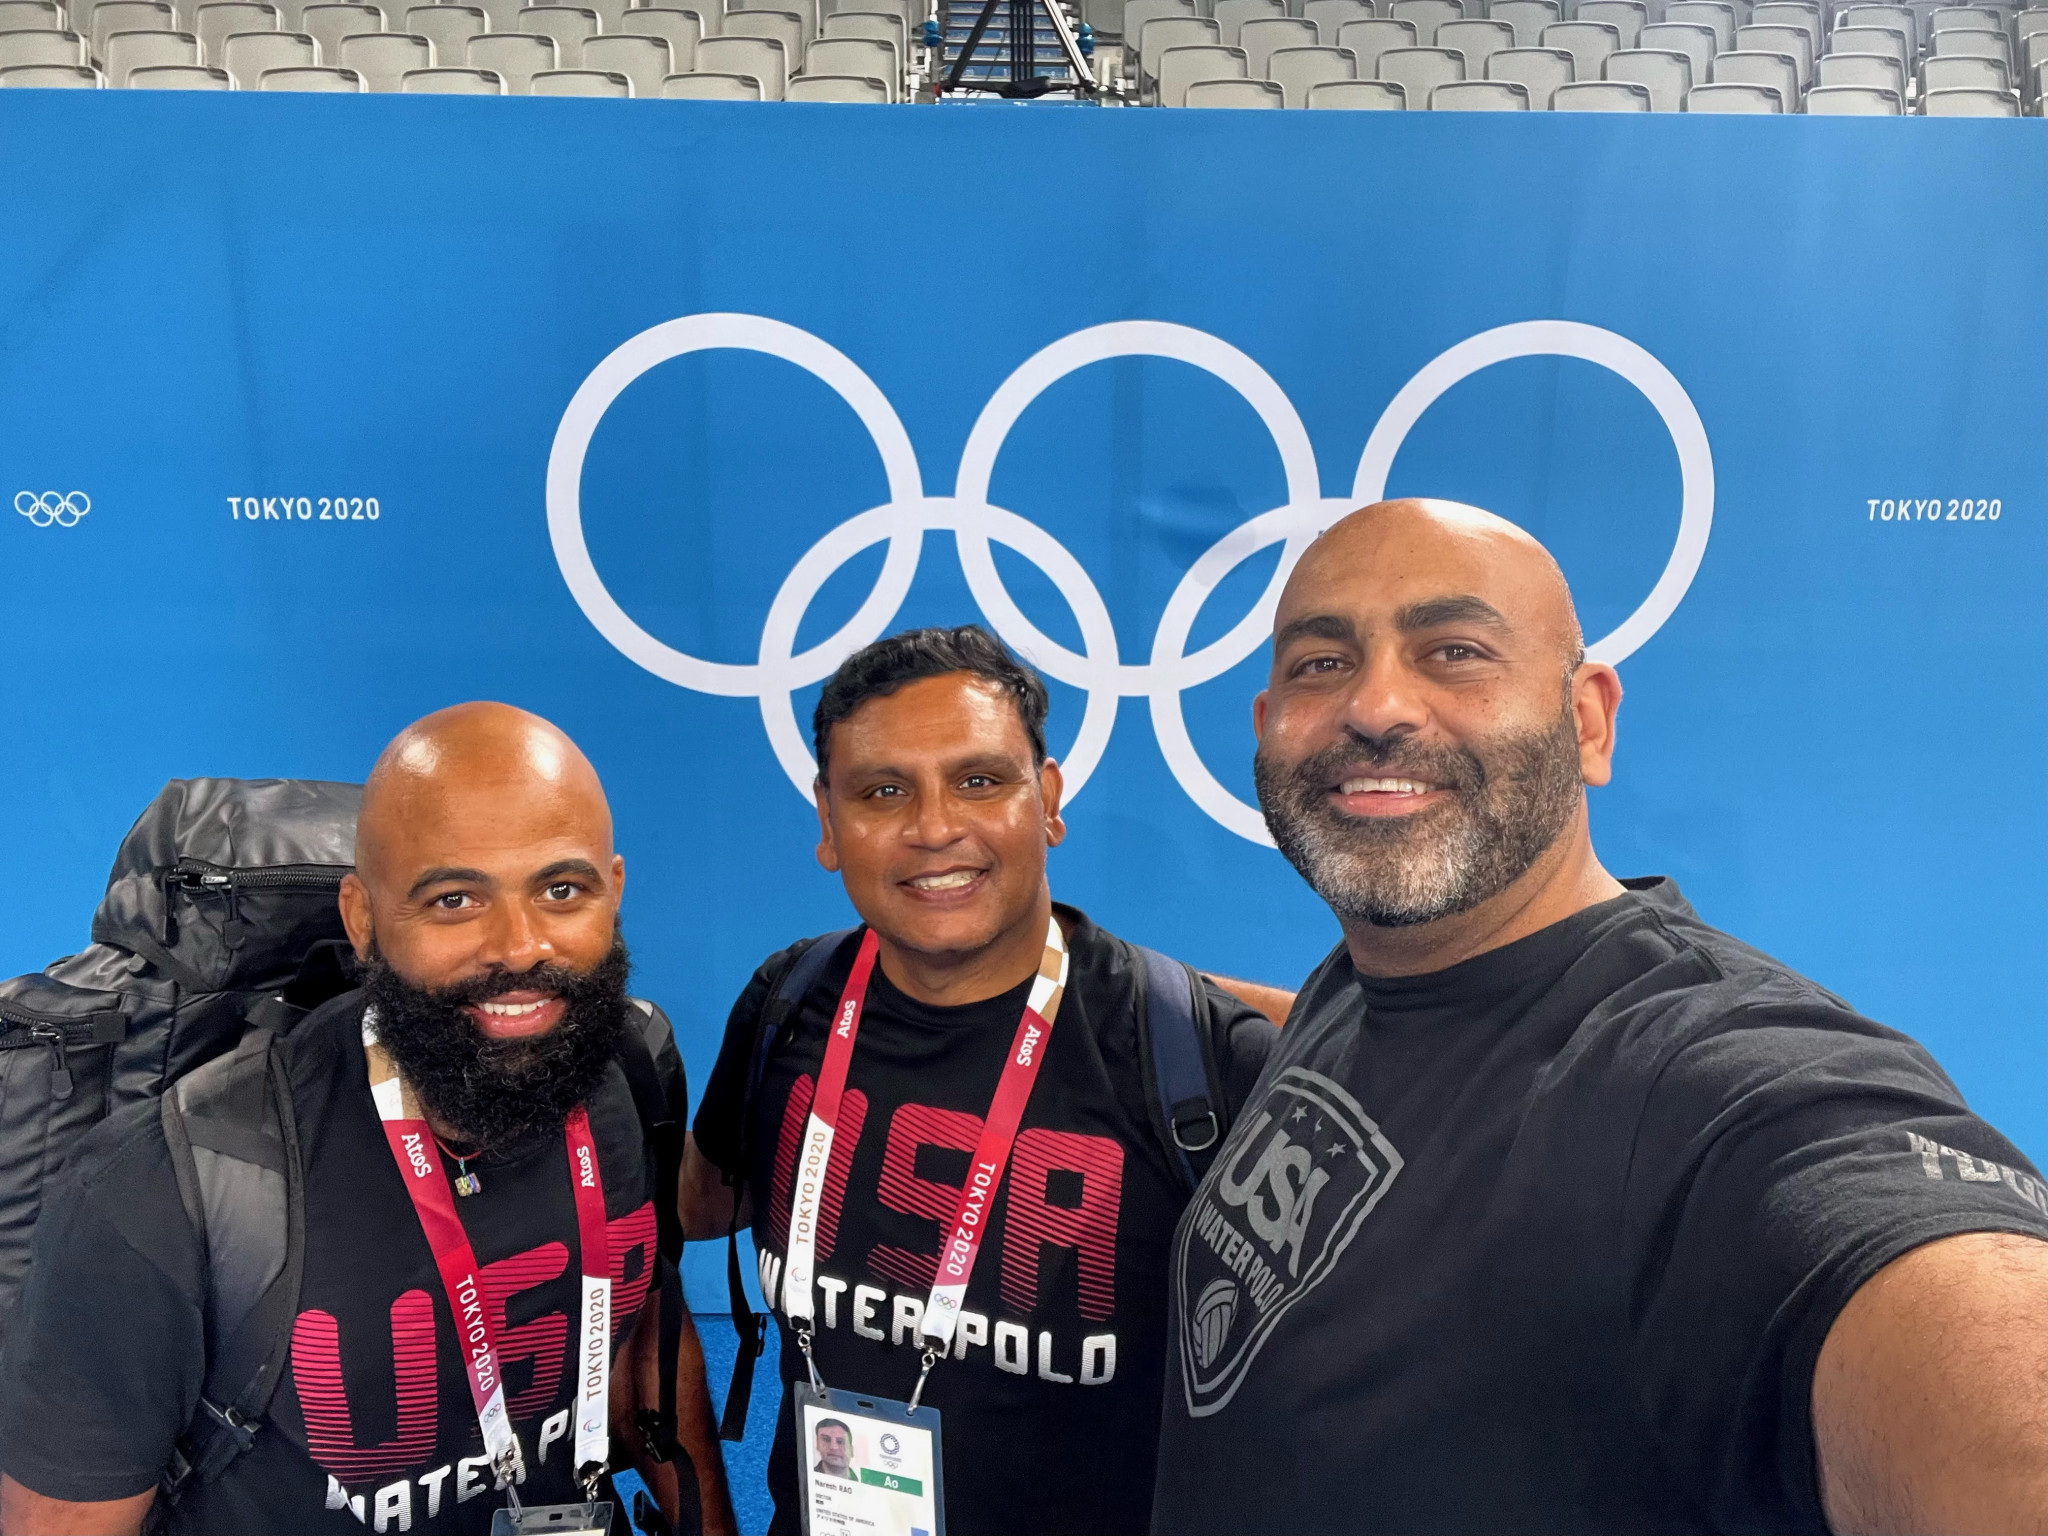 Dr Naresh Rao, centre, pictured with Christopher Bates, left, sport medicine manager of USA Water Polo and John Abdou, right, USA Water Polo chief high performance officer, during Tokyo 2020 ©Dr Naresh Rao